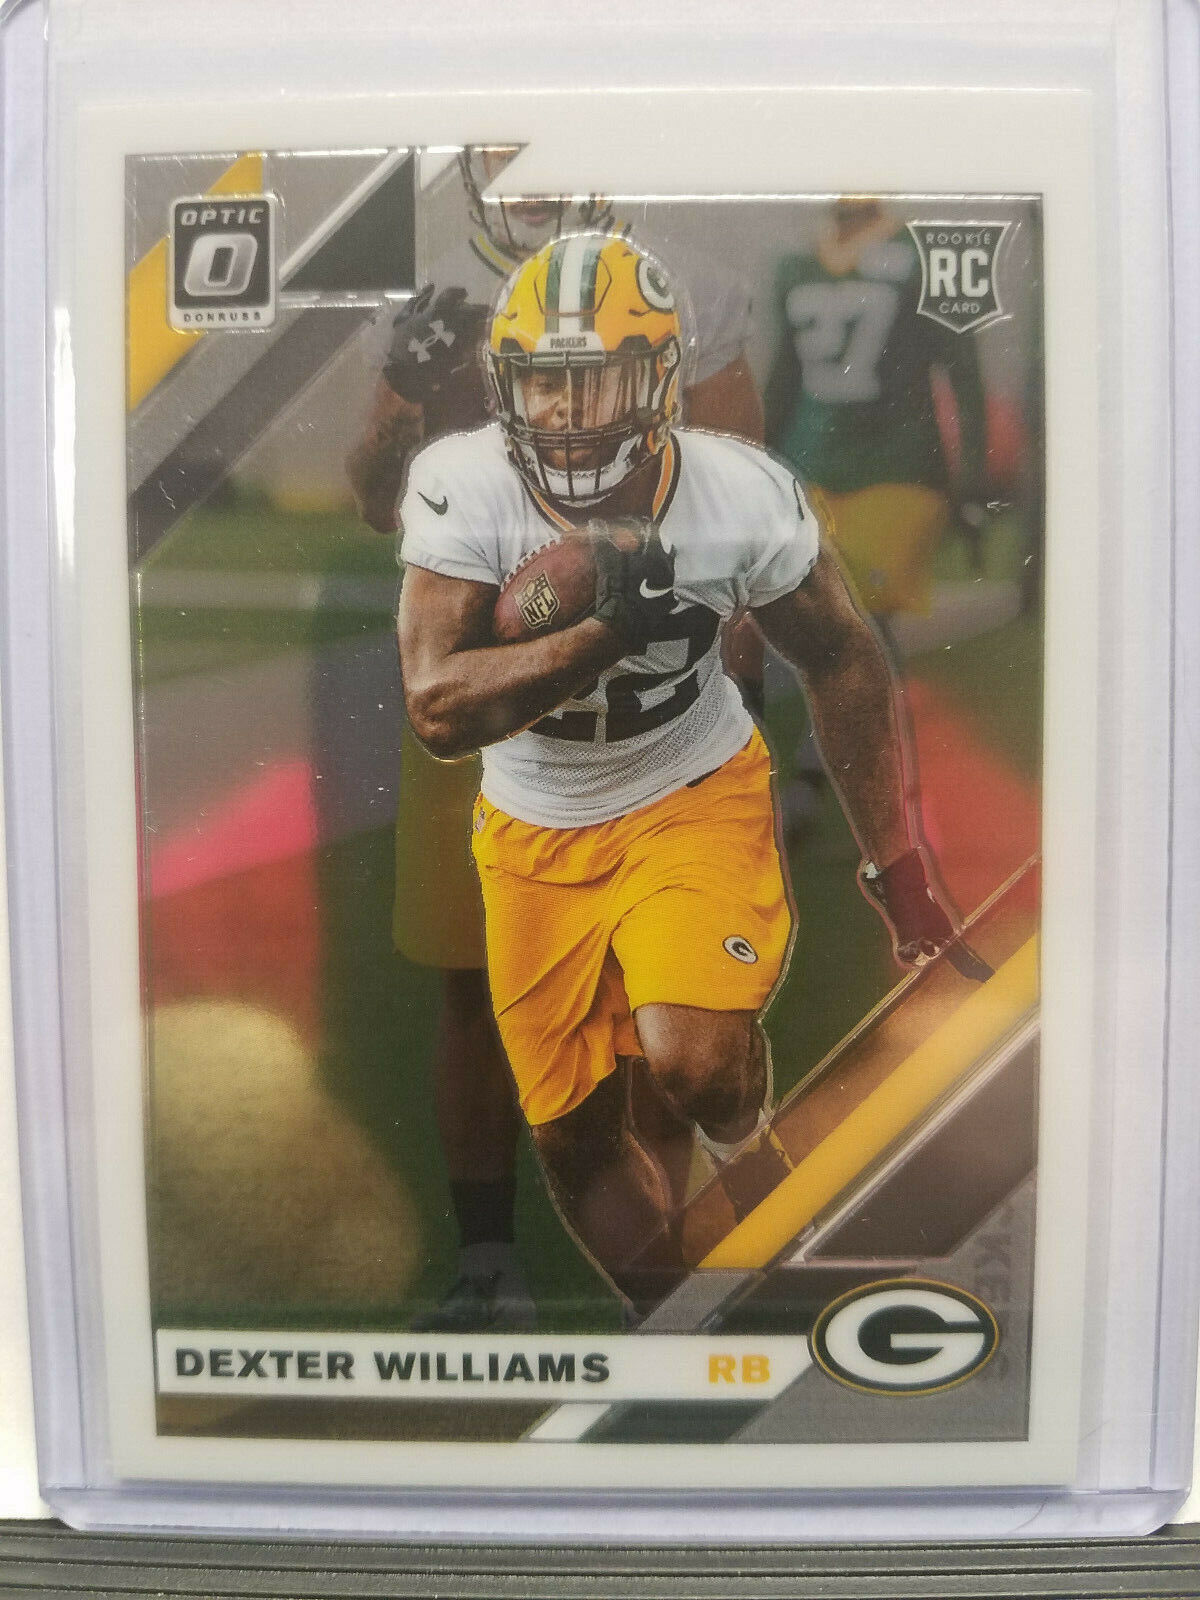 Dexter Williams 2019 Optic Football RC #146 Rookie Card - Green Bay Packers QTY. rookie card picture